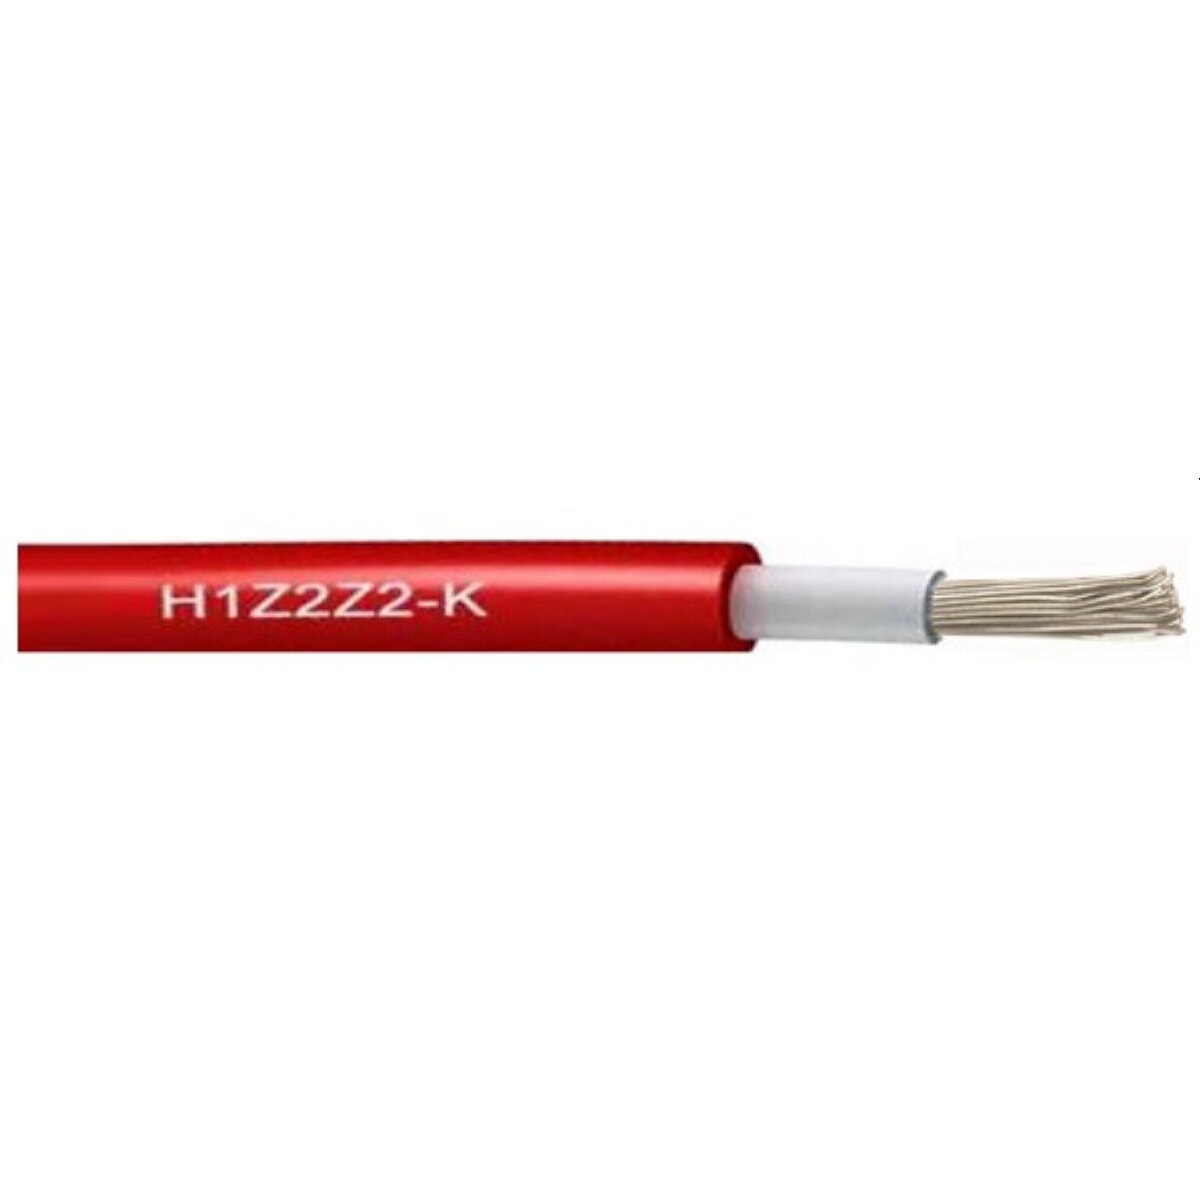 NEUT solar cable H1Z2Z2-K 1x6 red can be buried EN50618